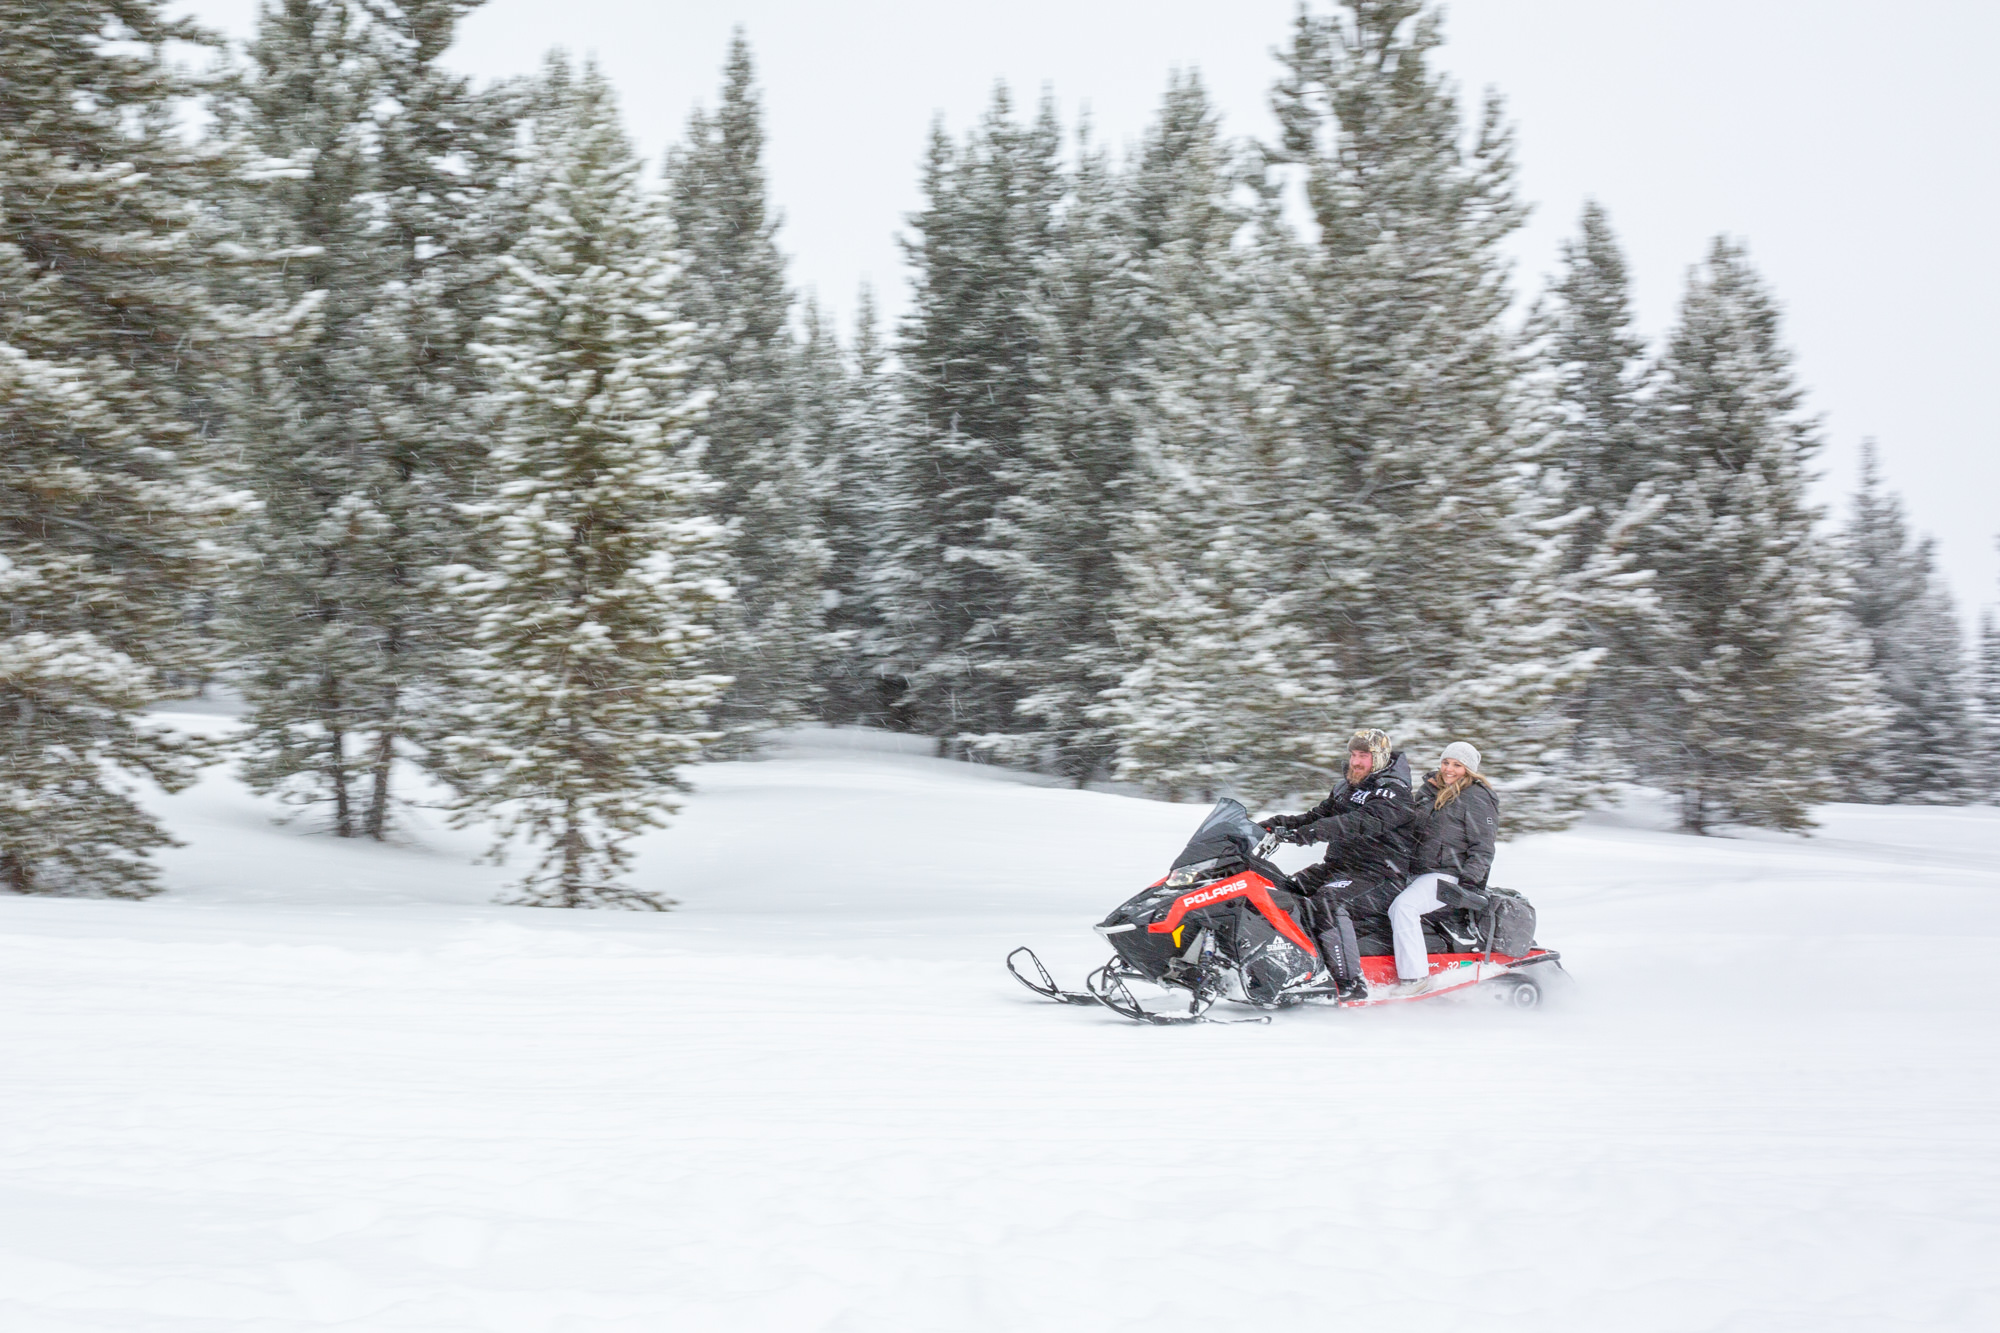 A couple ride on a snowmobile with trees behind them on their winter elopement day.